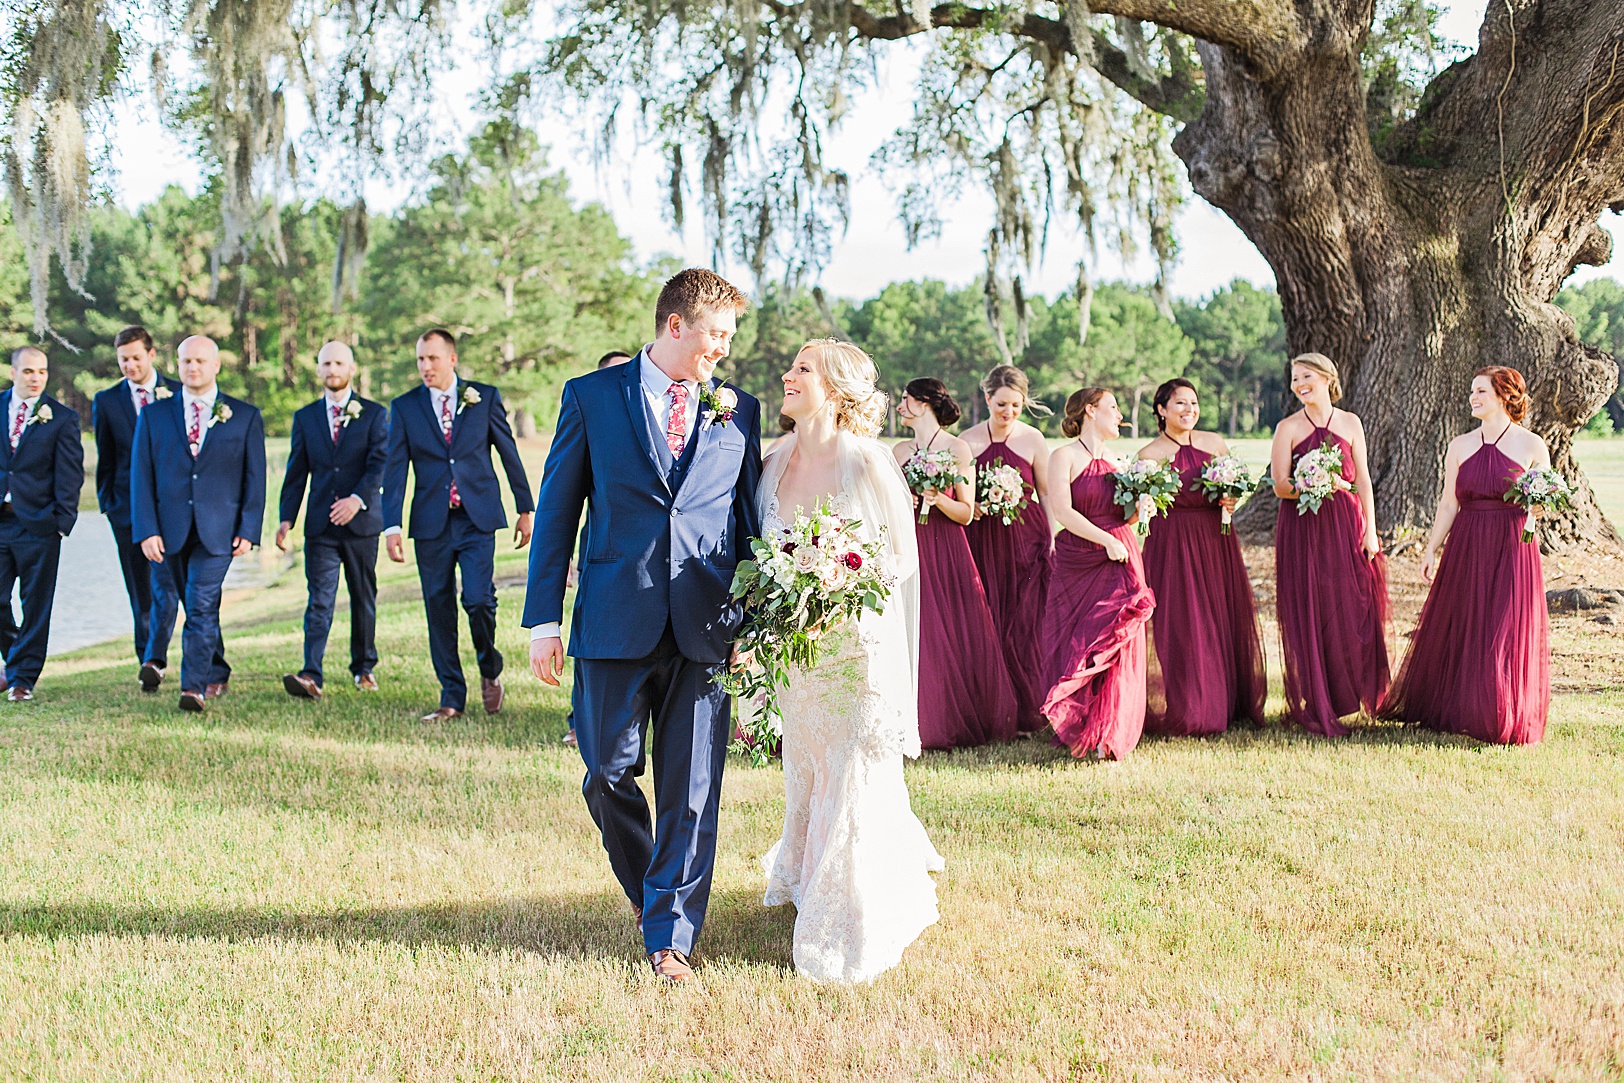 Romantic and Colorful Charleston Wedding at Wingate | Kaitlin Scott Photography